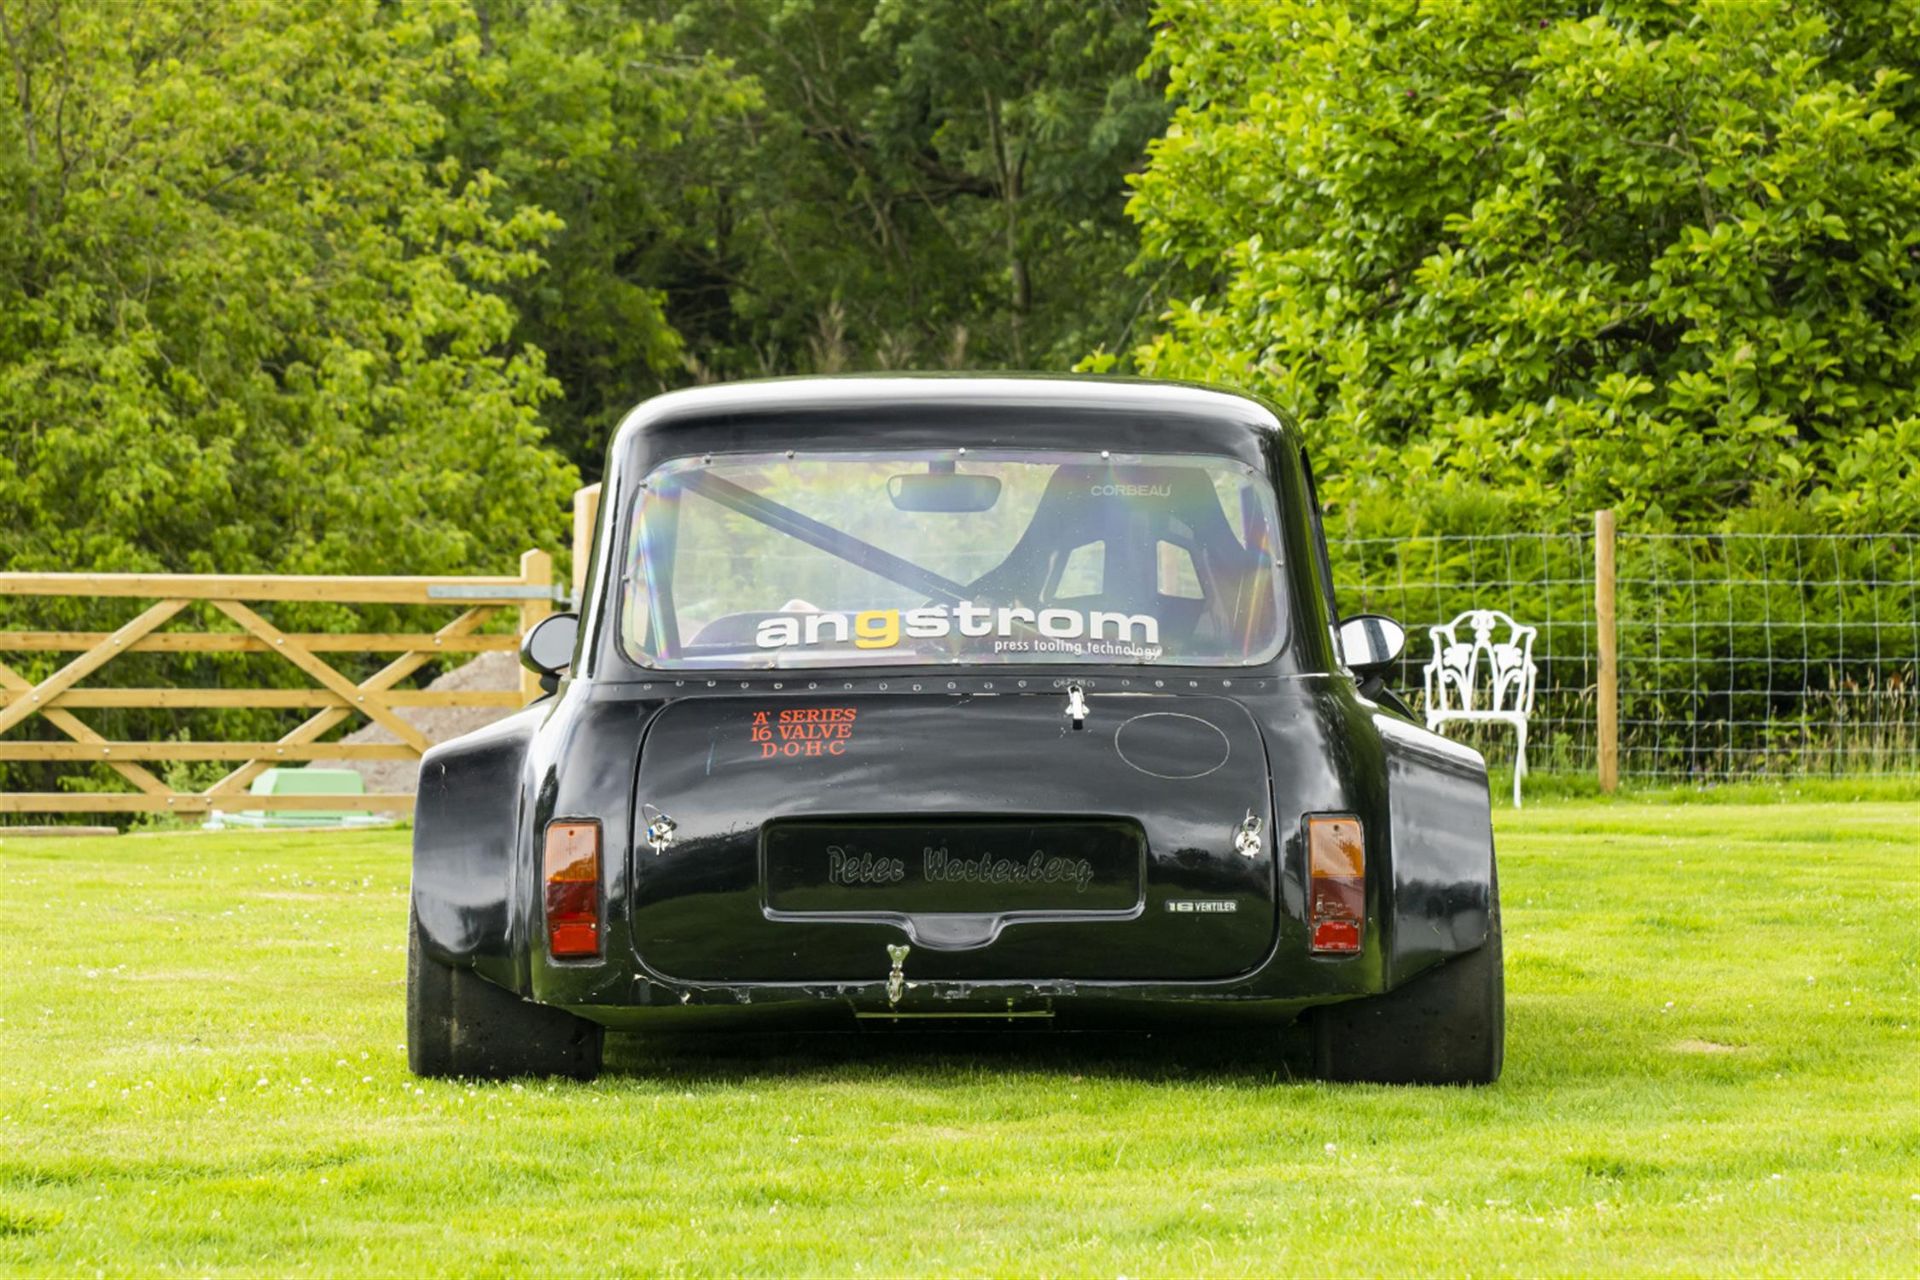 1979 Maguire Mini Twin-Cam TS.79.DH - Image 7 of 10